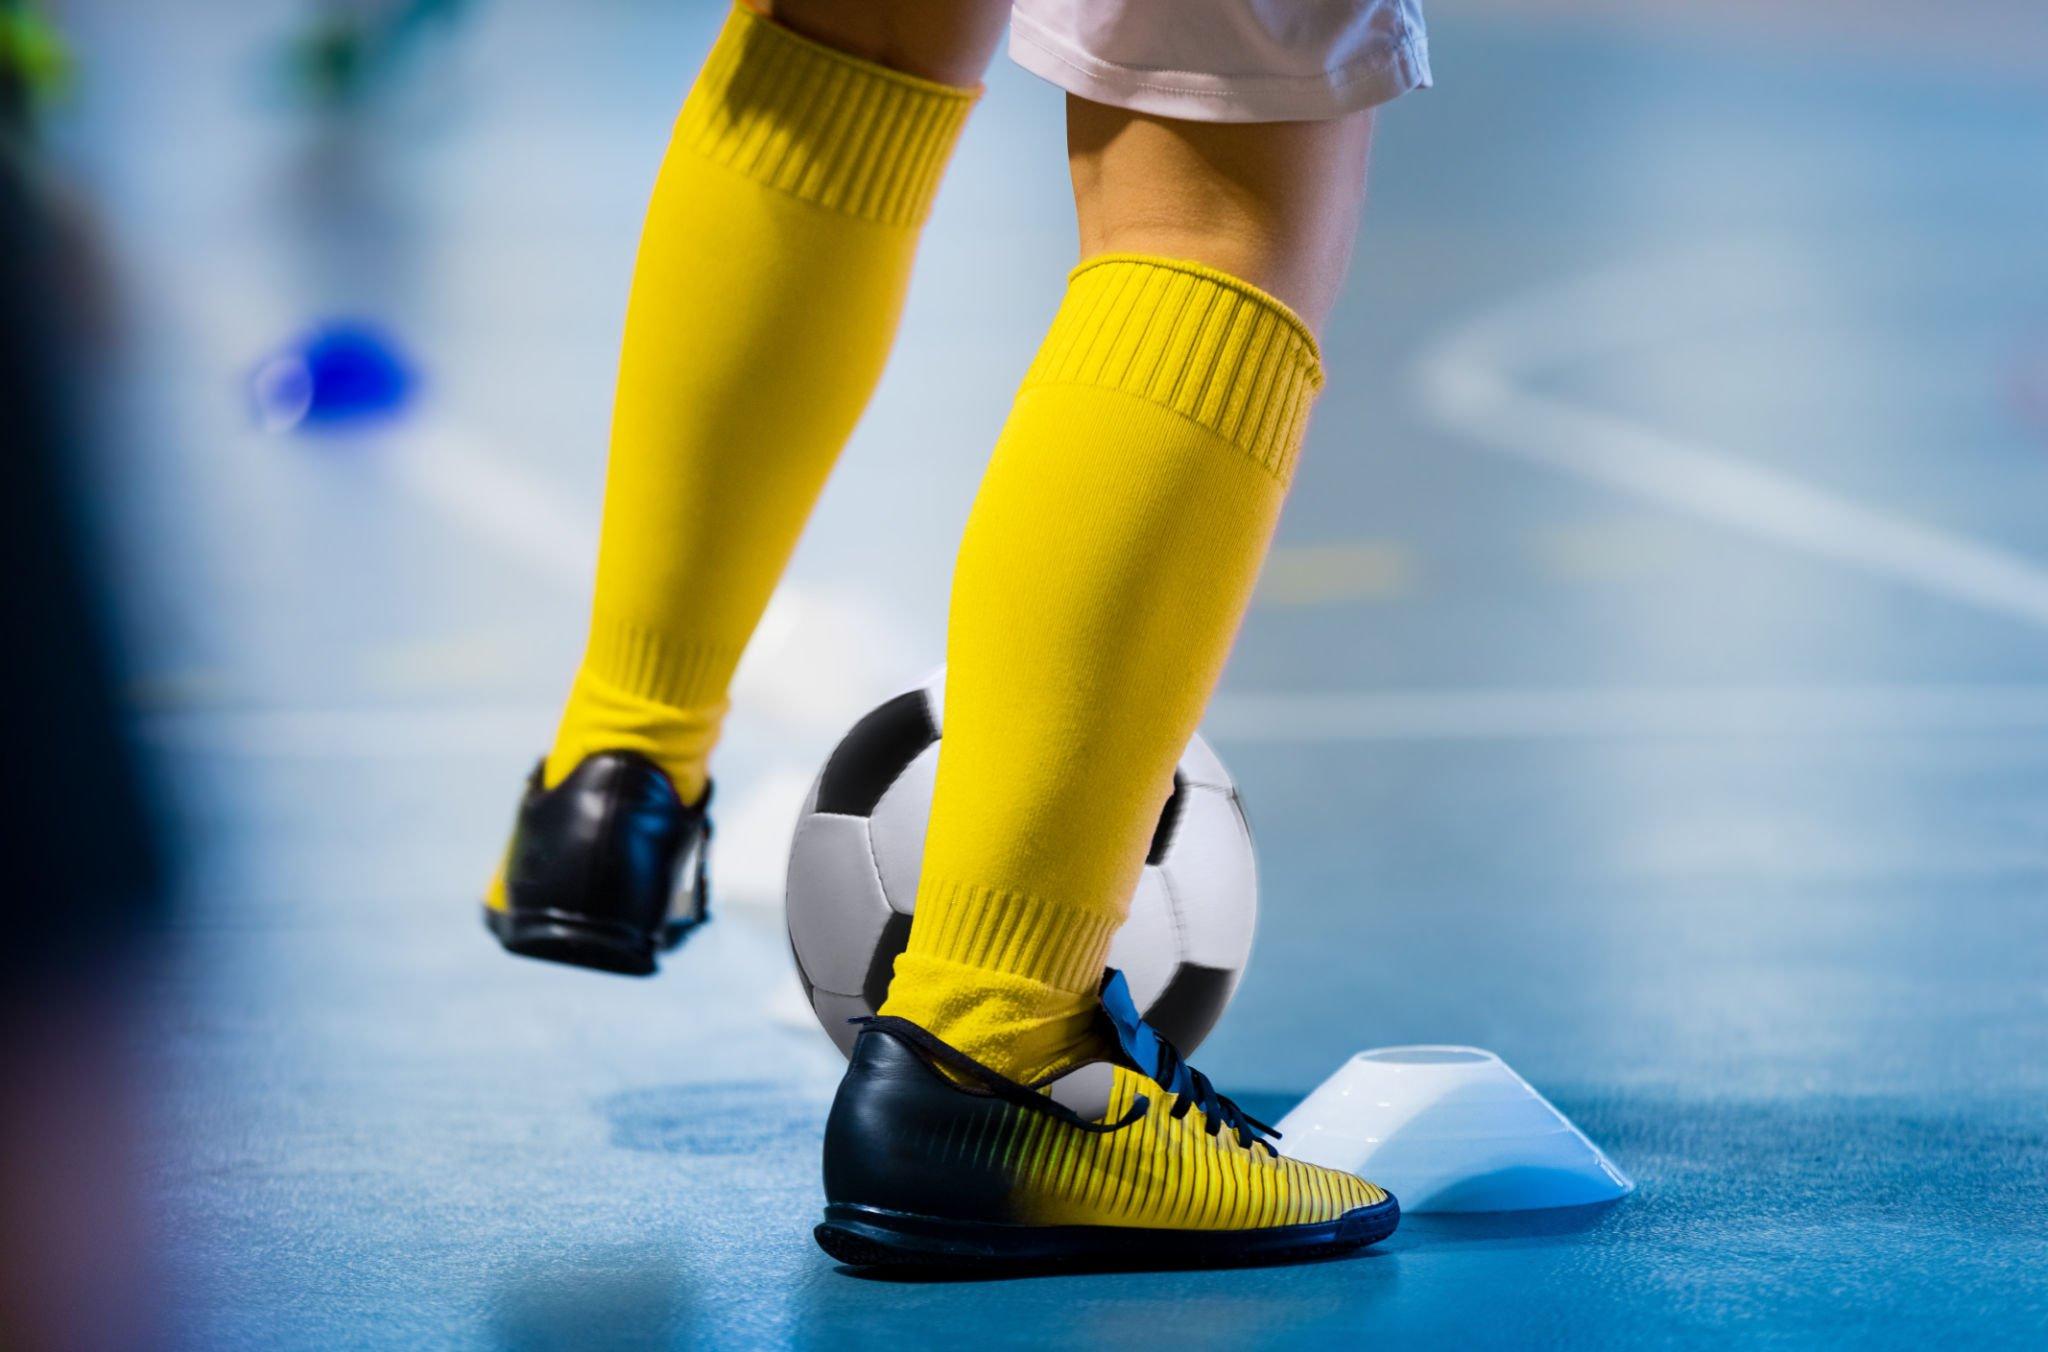 Are indoor soccer shoes good for lifting